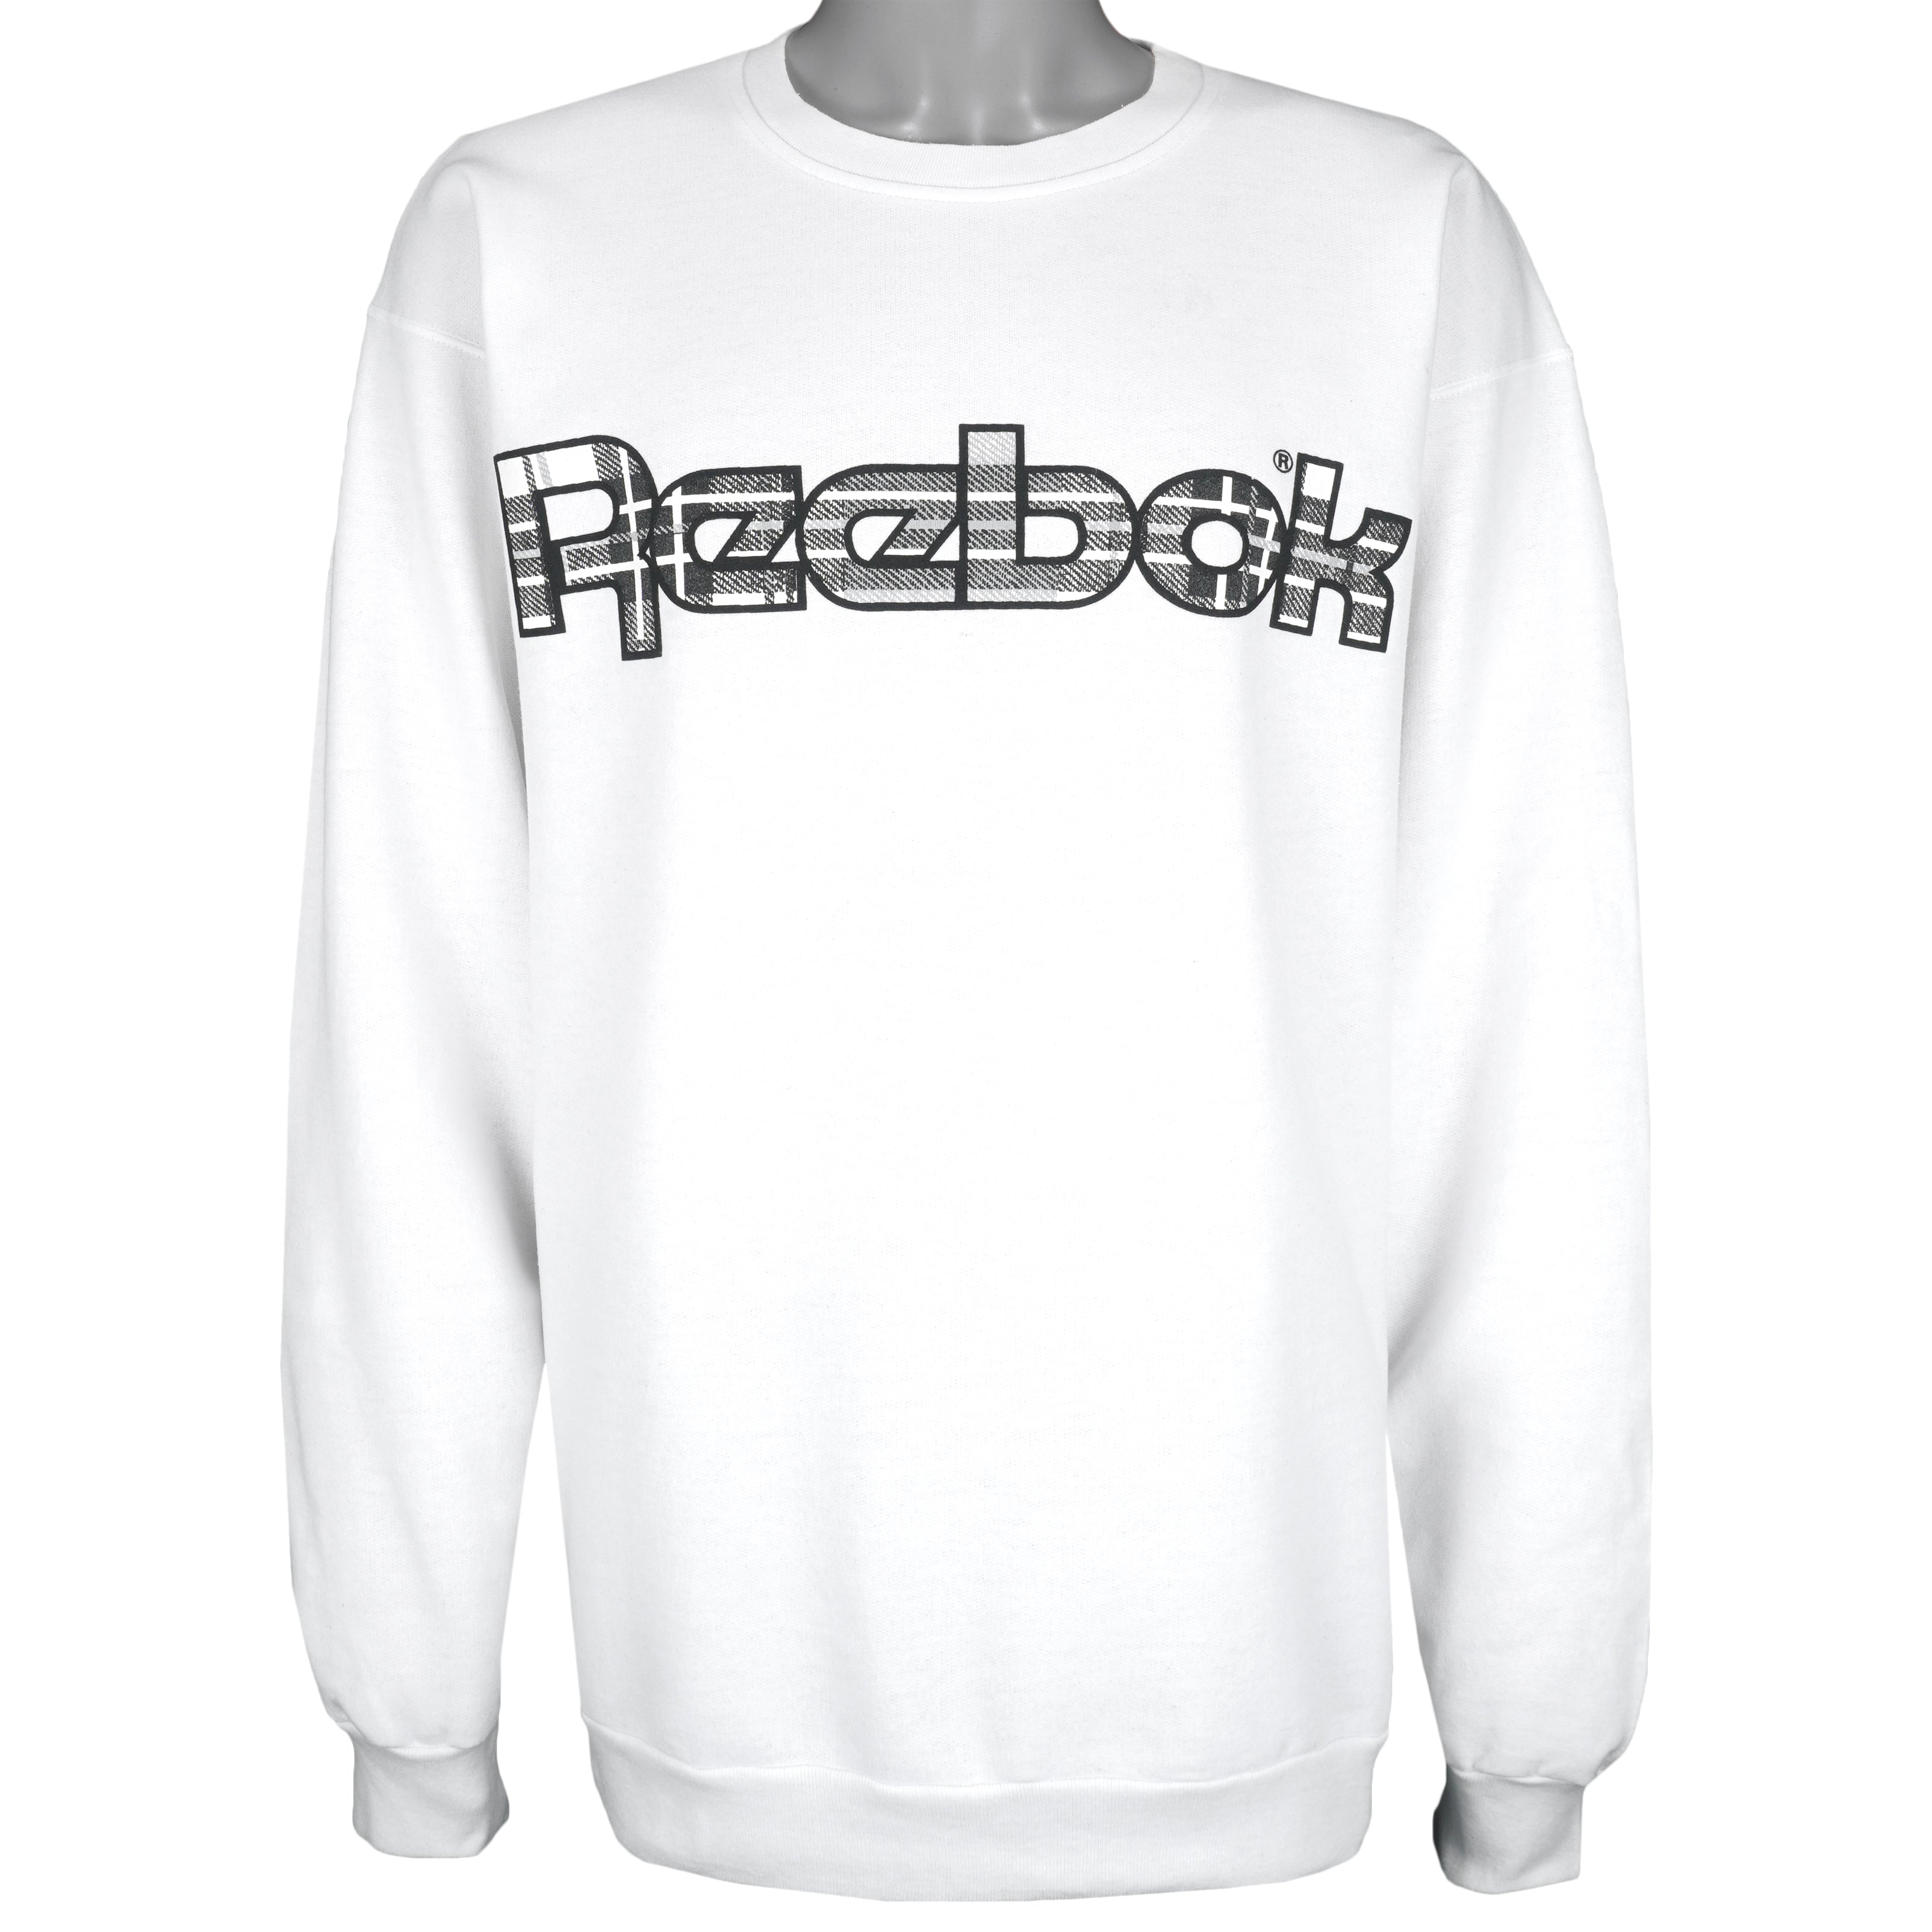 Vintage Reebok - White Classic Spell-Out Crew Neck Sweatshirt 1990s Large – Vintage Clothing